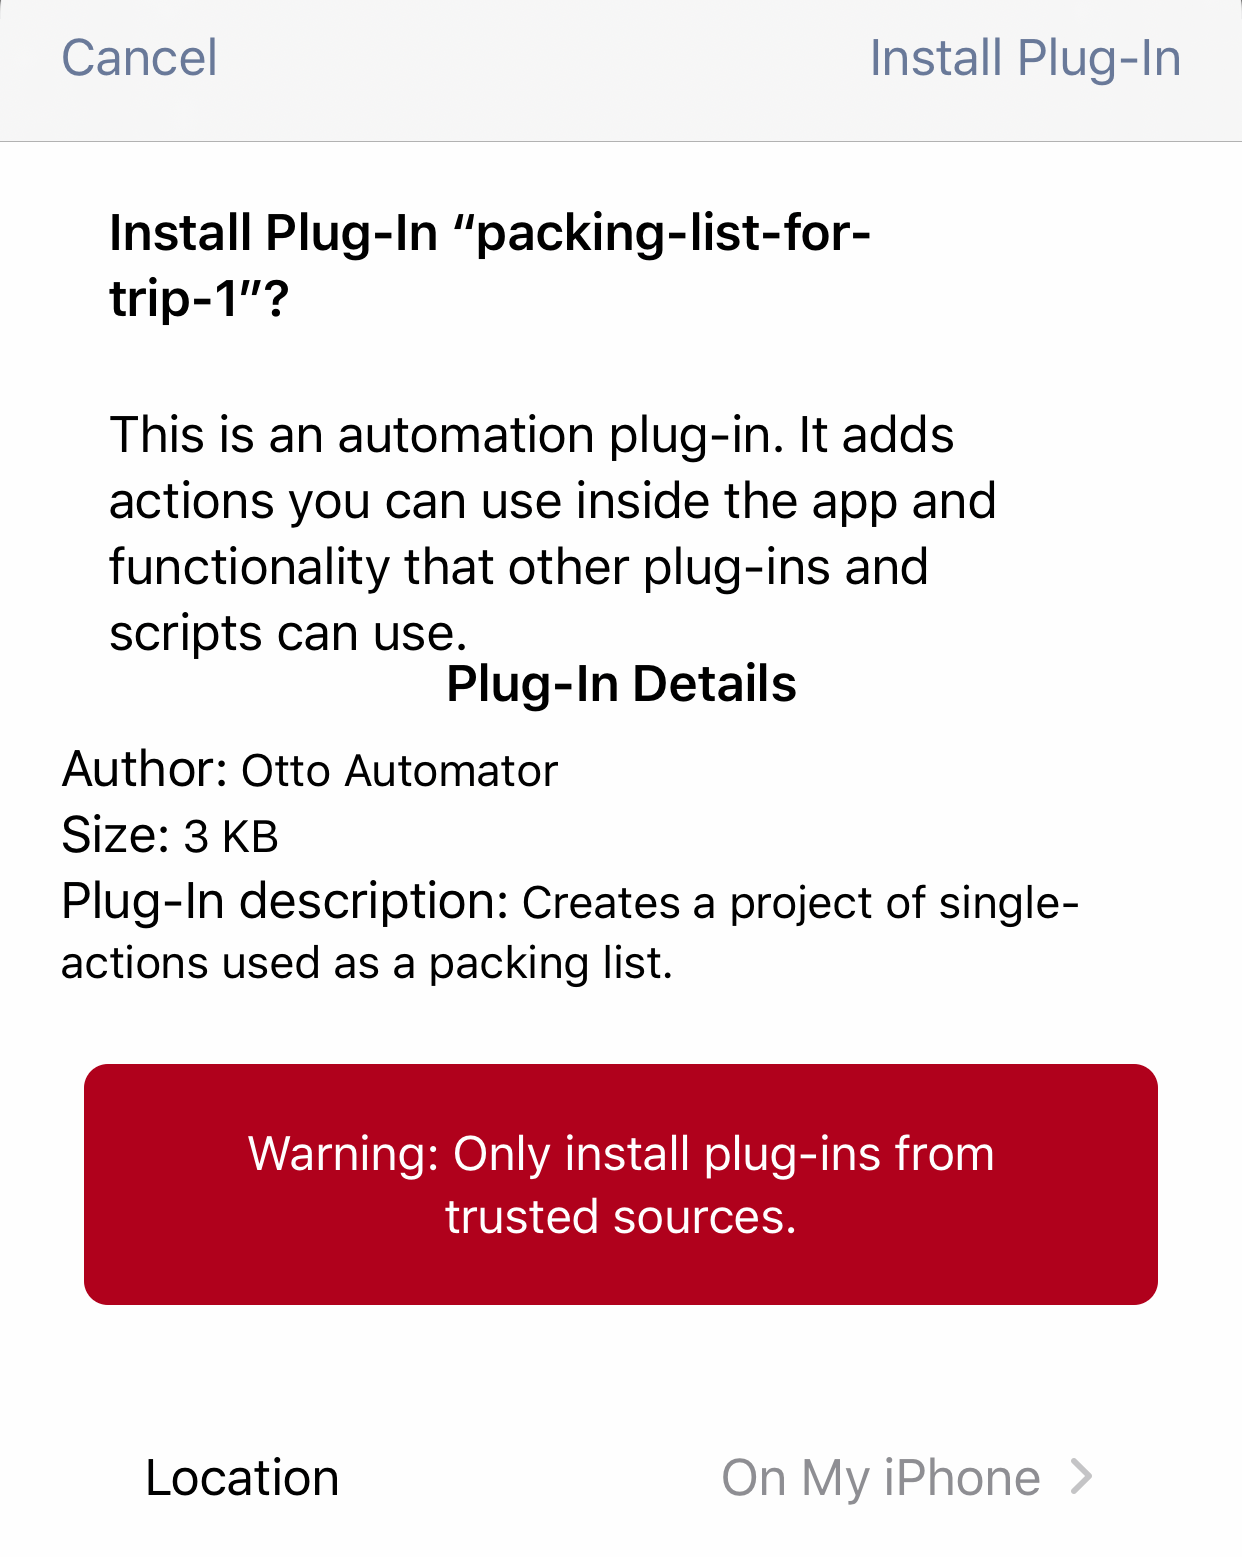 The Omni Automation Plug-In import dialog.